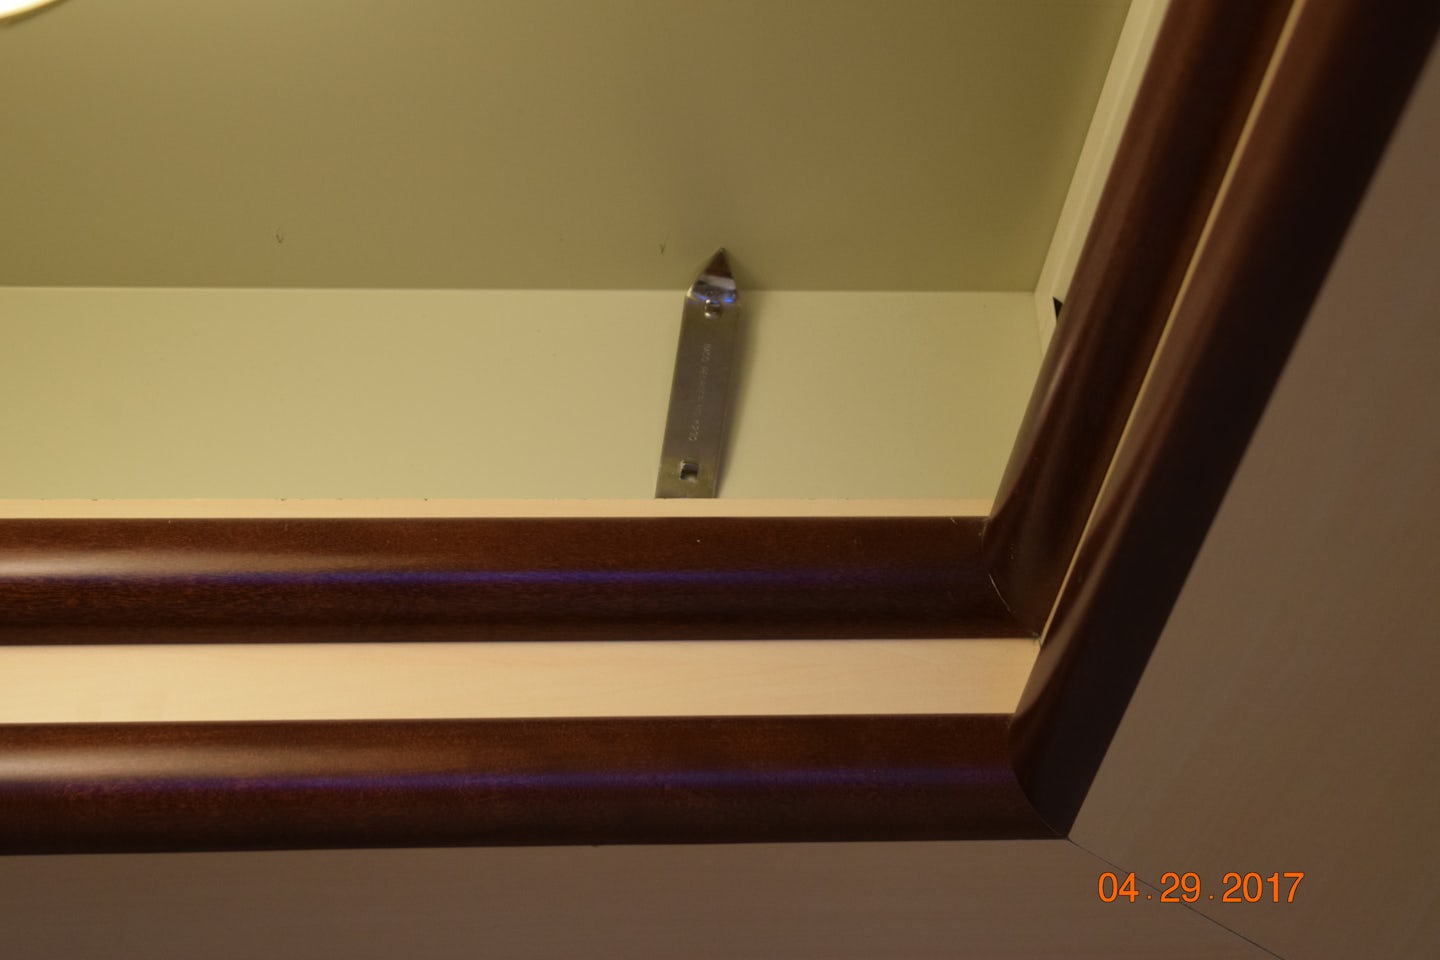 Bottle opener installed by prior cruiser in light fixture to stop rattle.